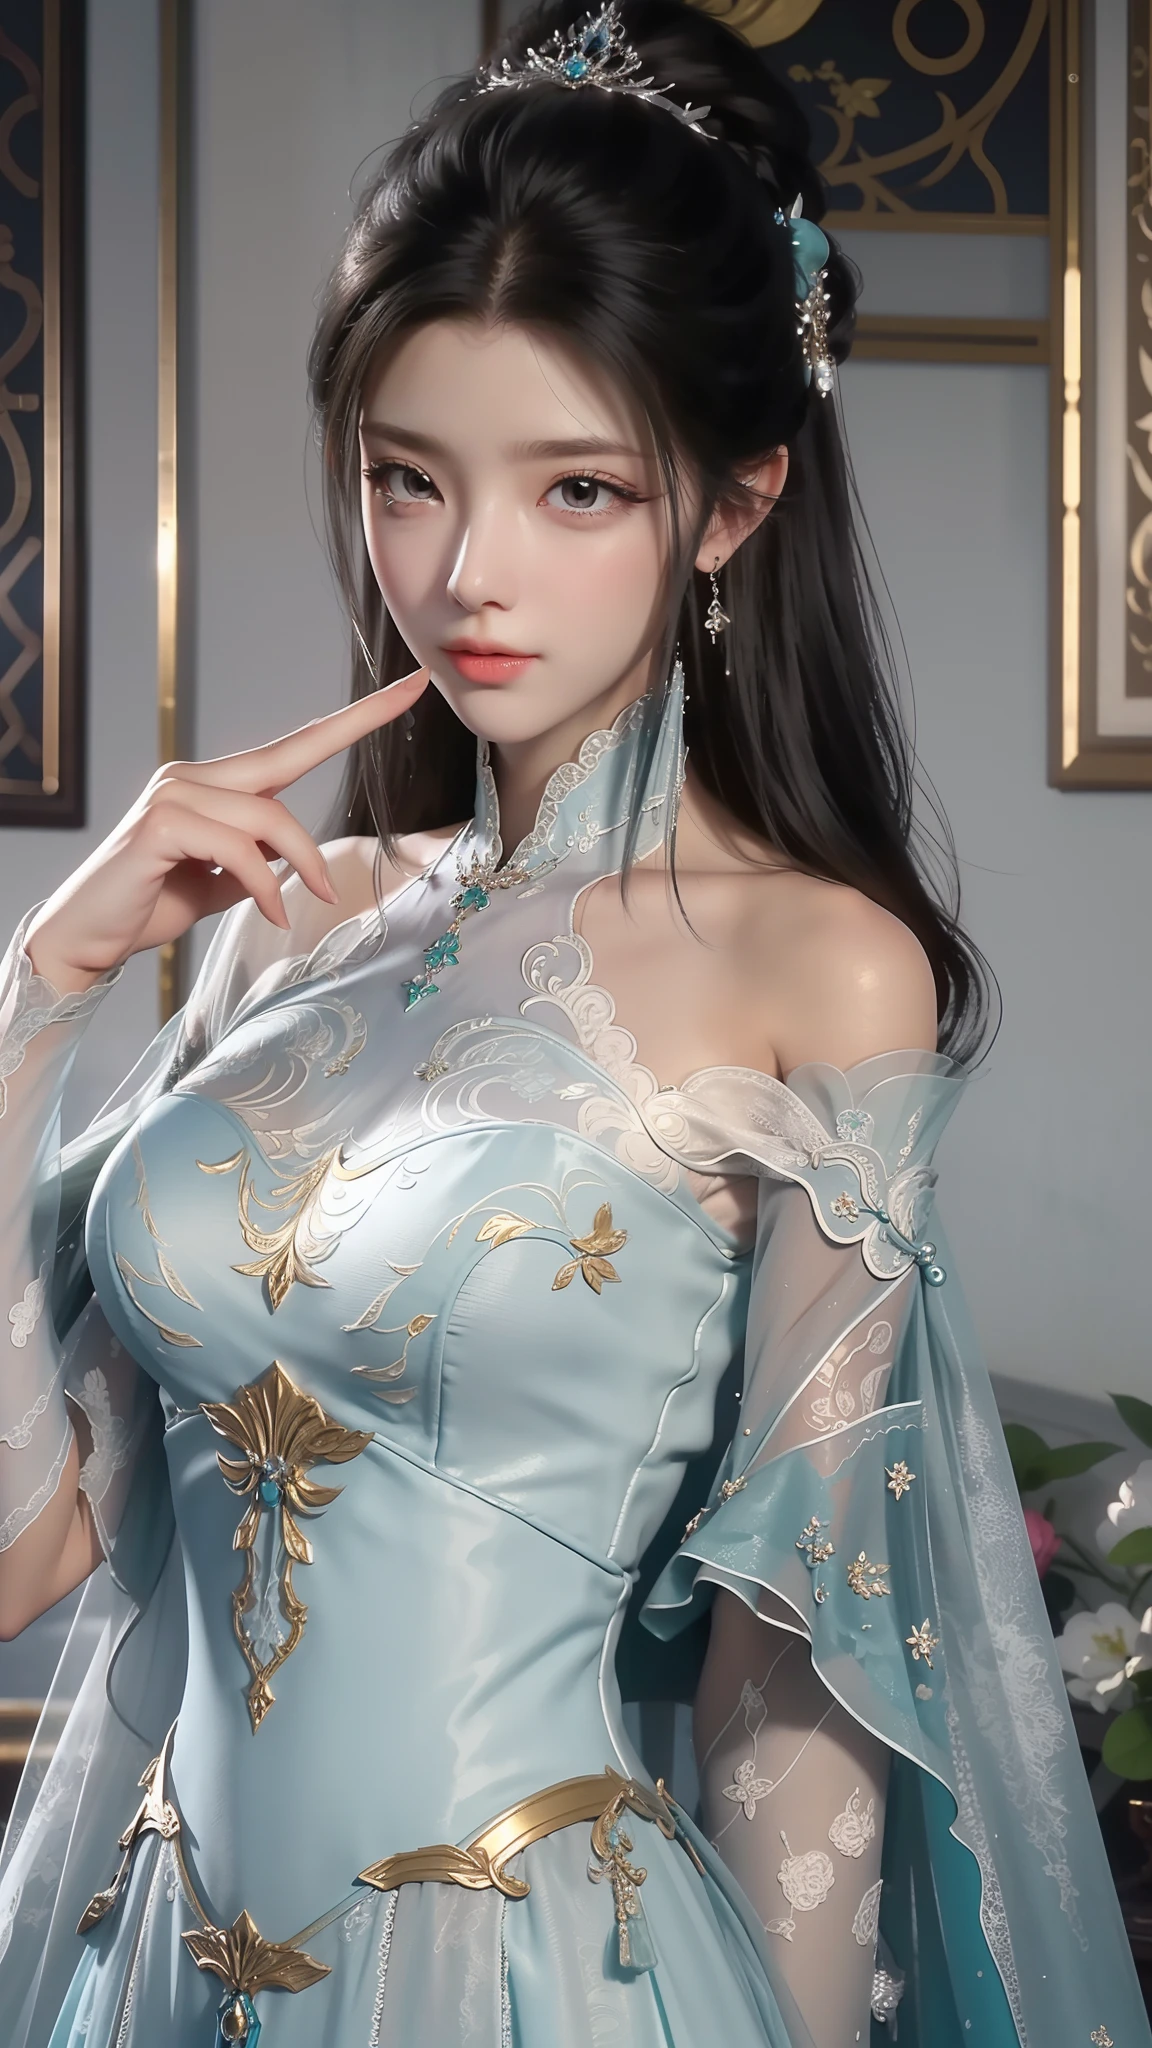 tmasterpiece，Best picture quality，HD 8K wallpaper，Beautiful picture，Elegant single woman，Round dress，Shiny eyes，Detail at its best，An exquisite masterpiece，Pure beauty and lightnesoderately aesthetic，Gentle and elegant，Attention to detail，Cyan white lace round princess dress，Immortal